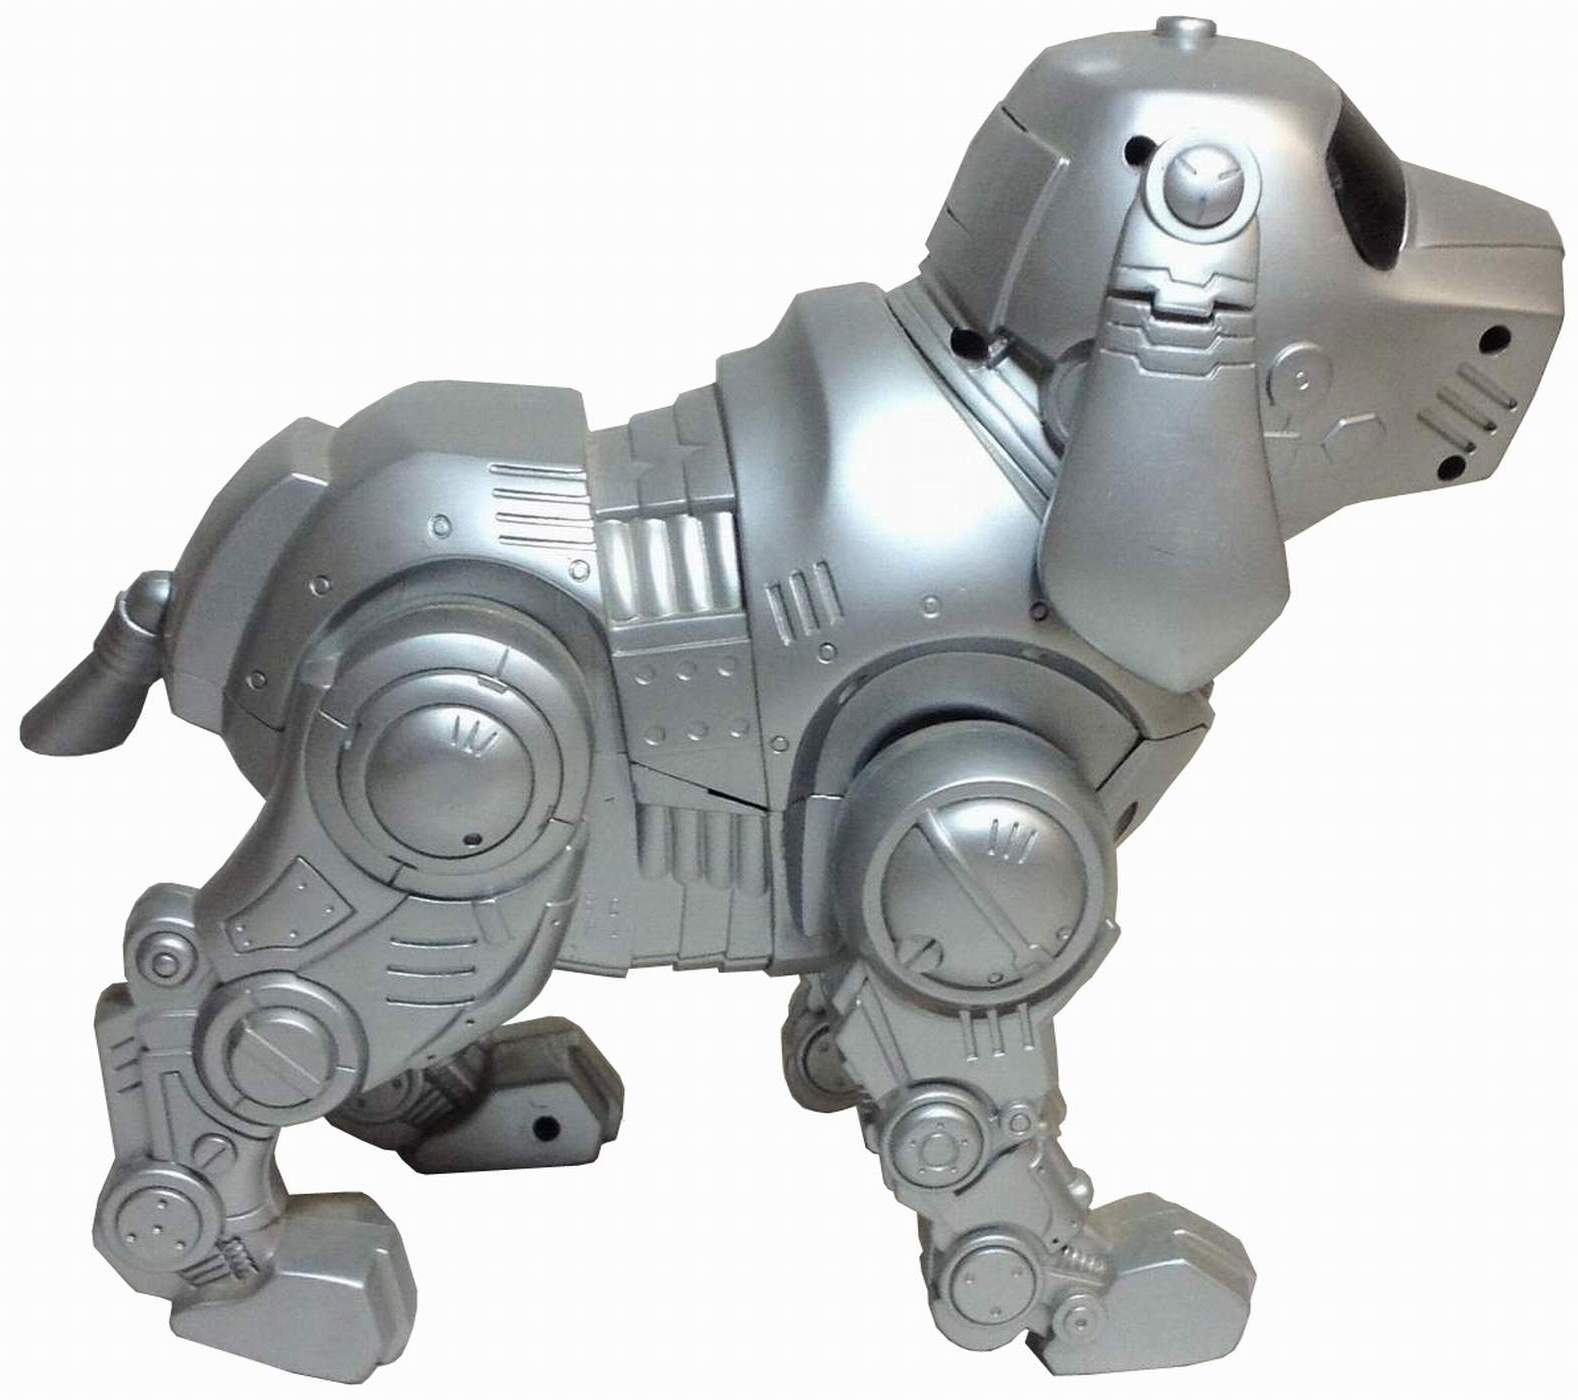 Tekno The Robotic Puppy - The Old Robot 